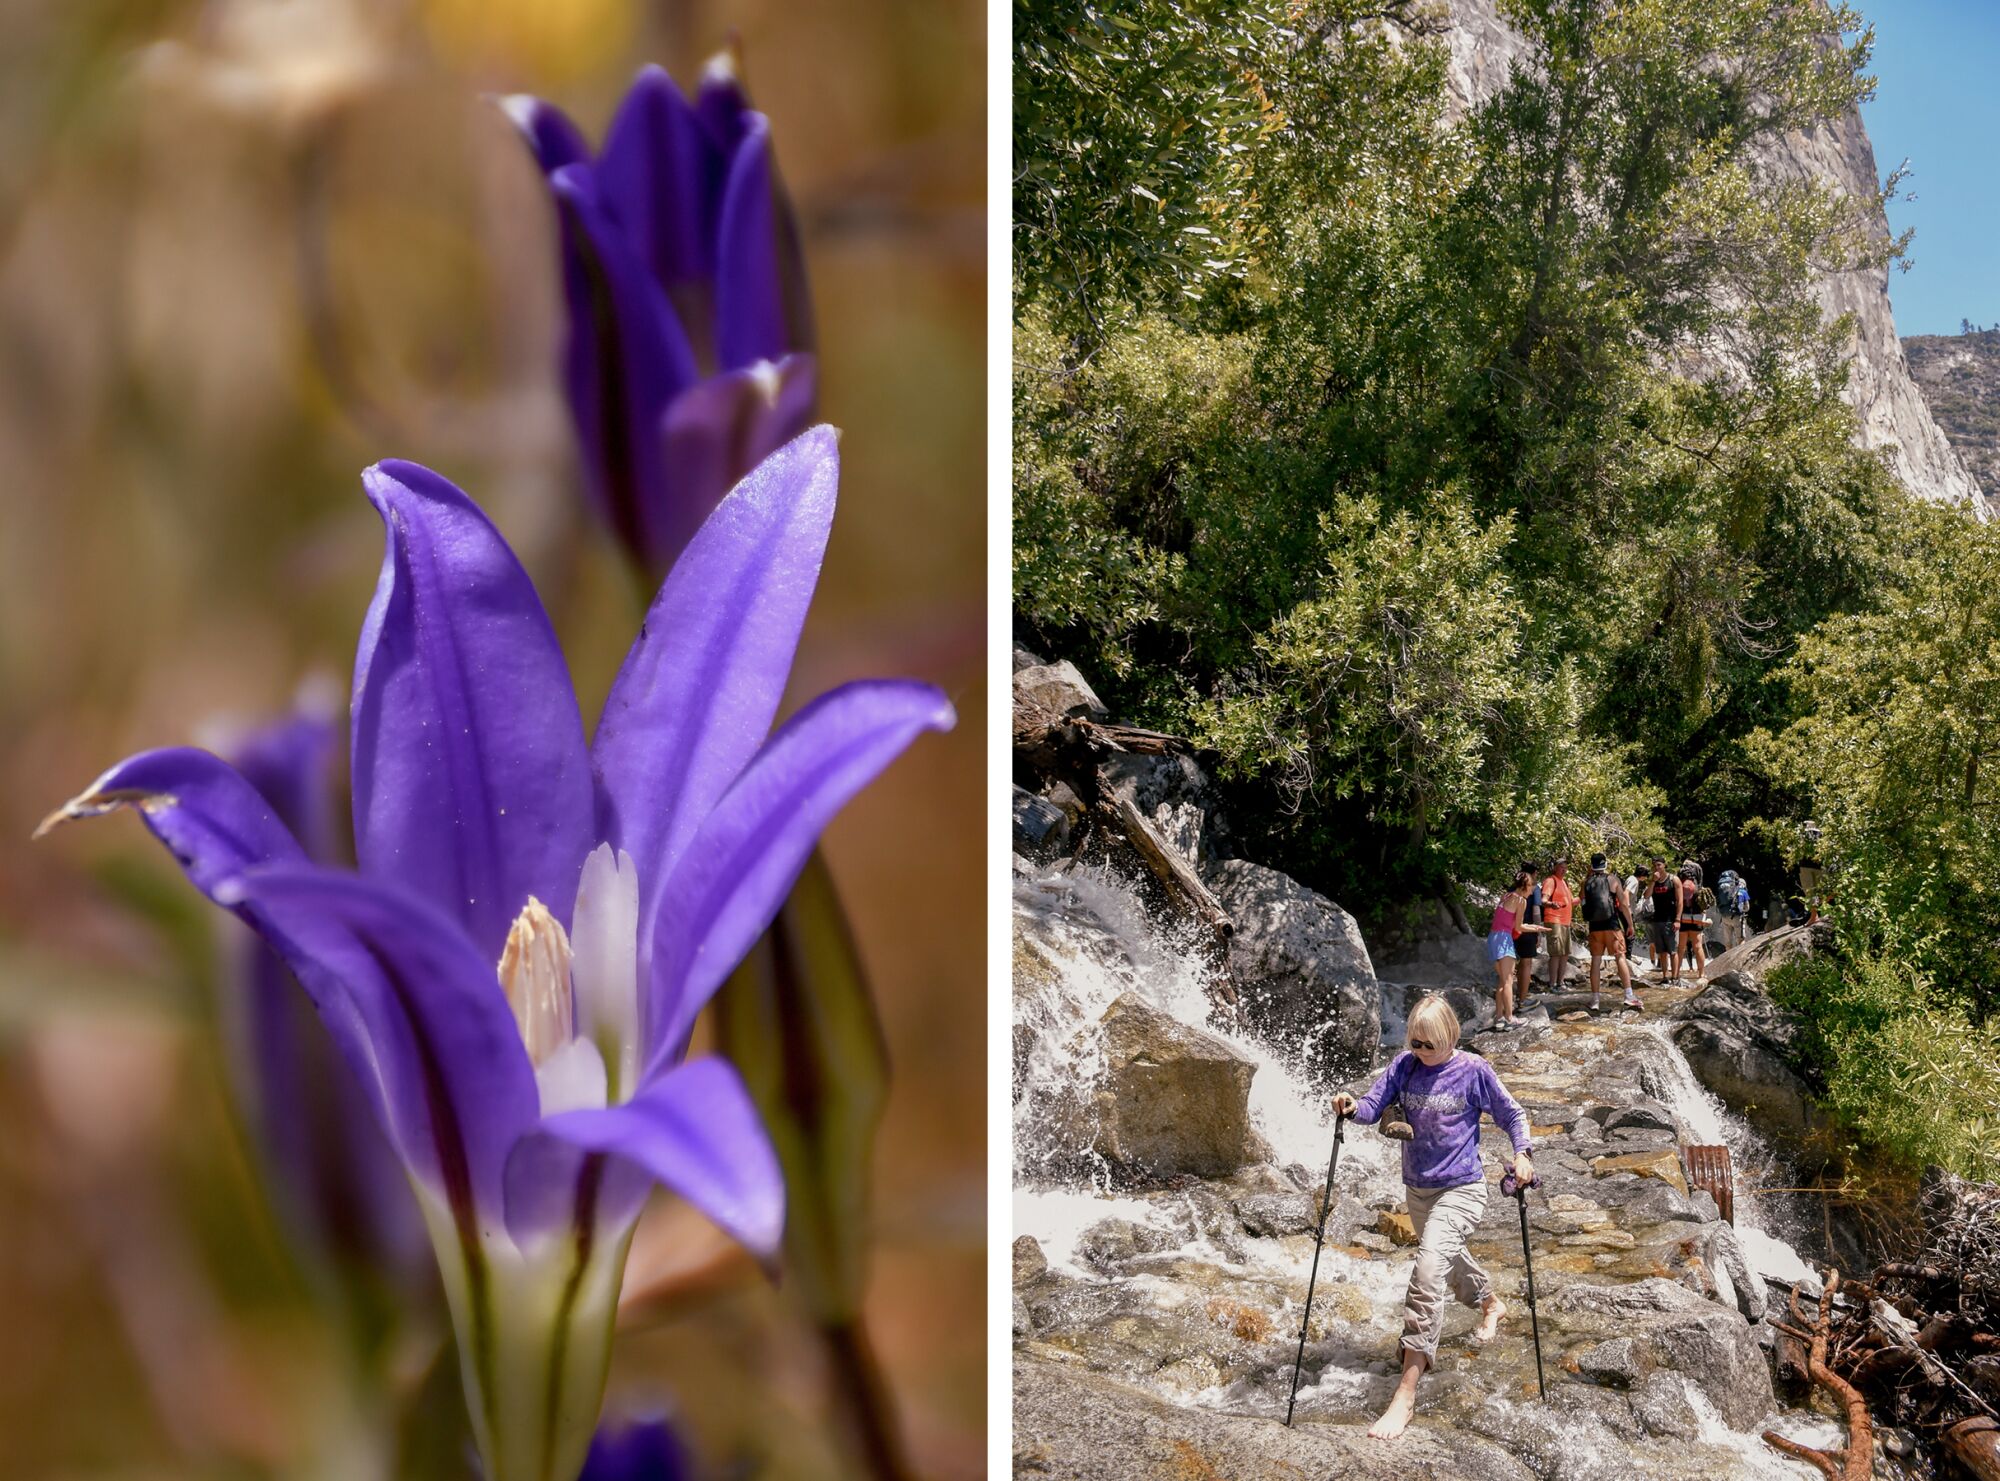 Two photos side by side, one of a purple flower and the other of a woman in a purple shirt crossing over a wet rocky trail.